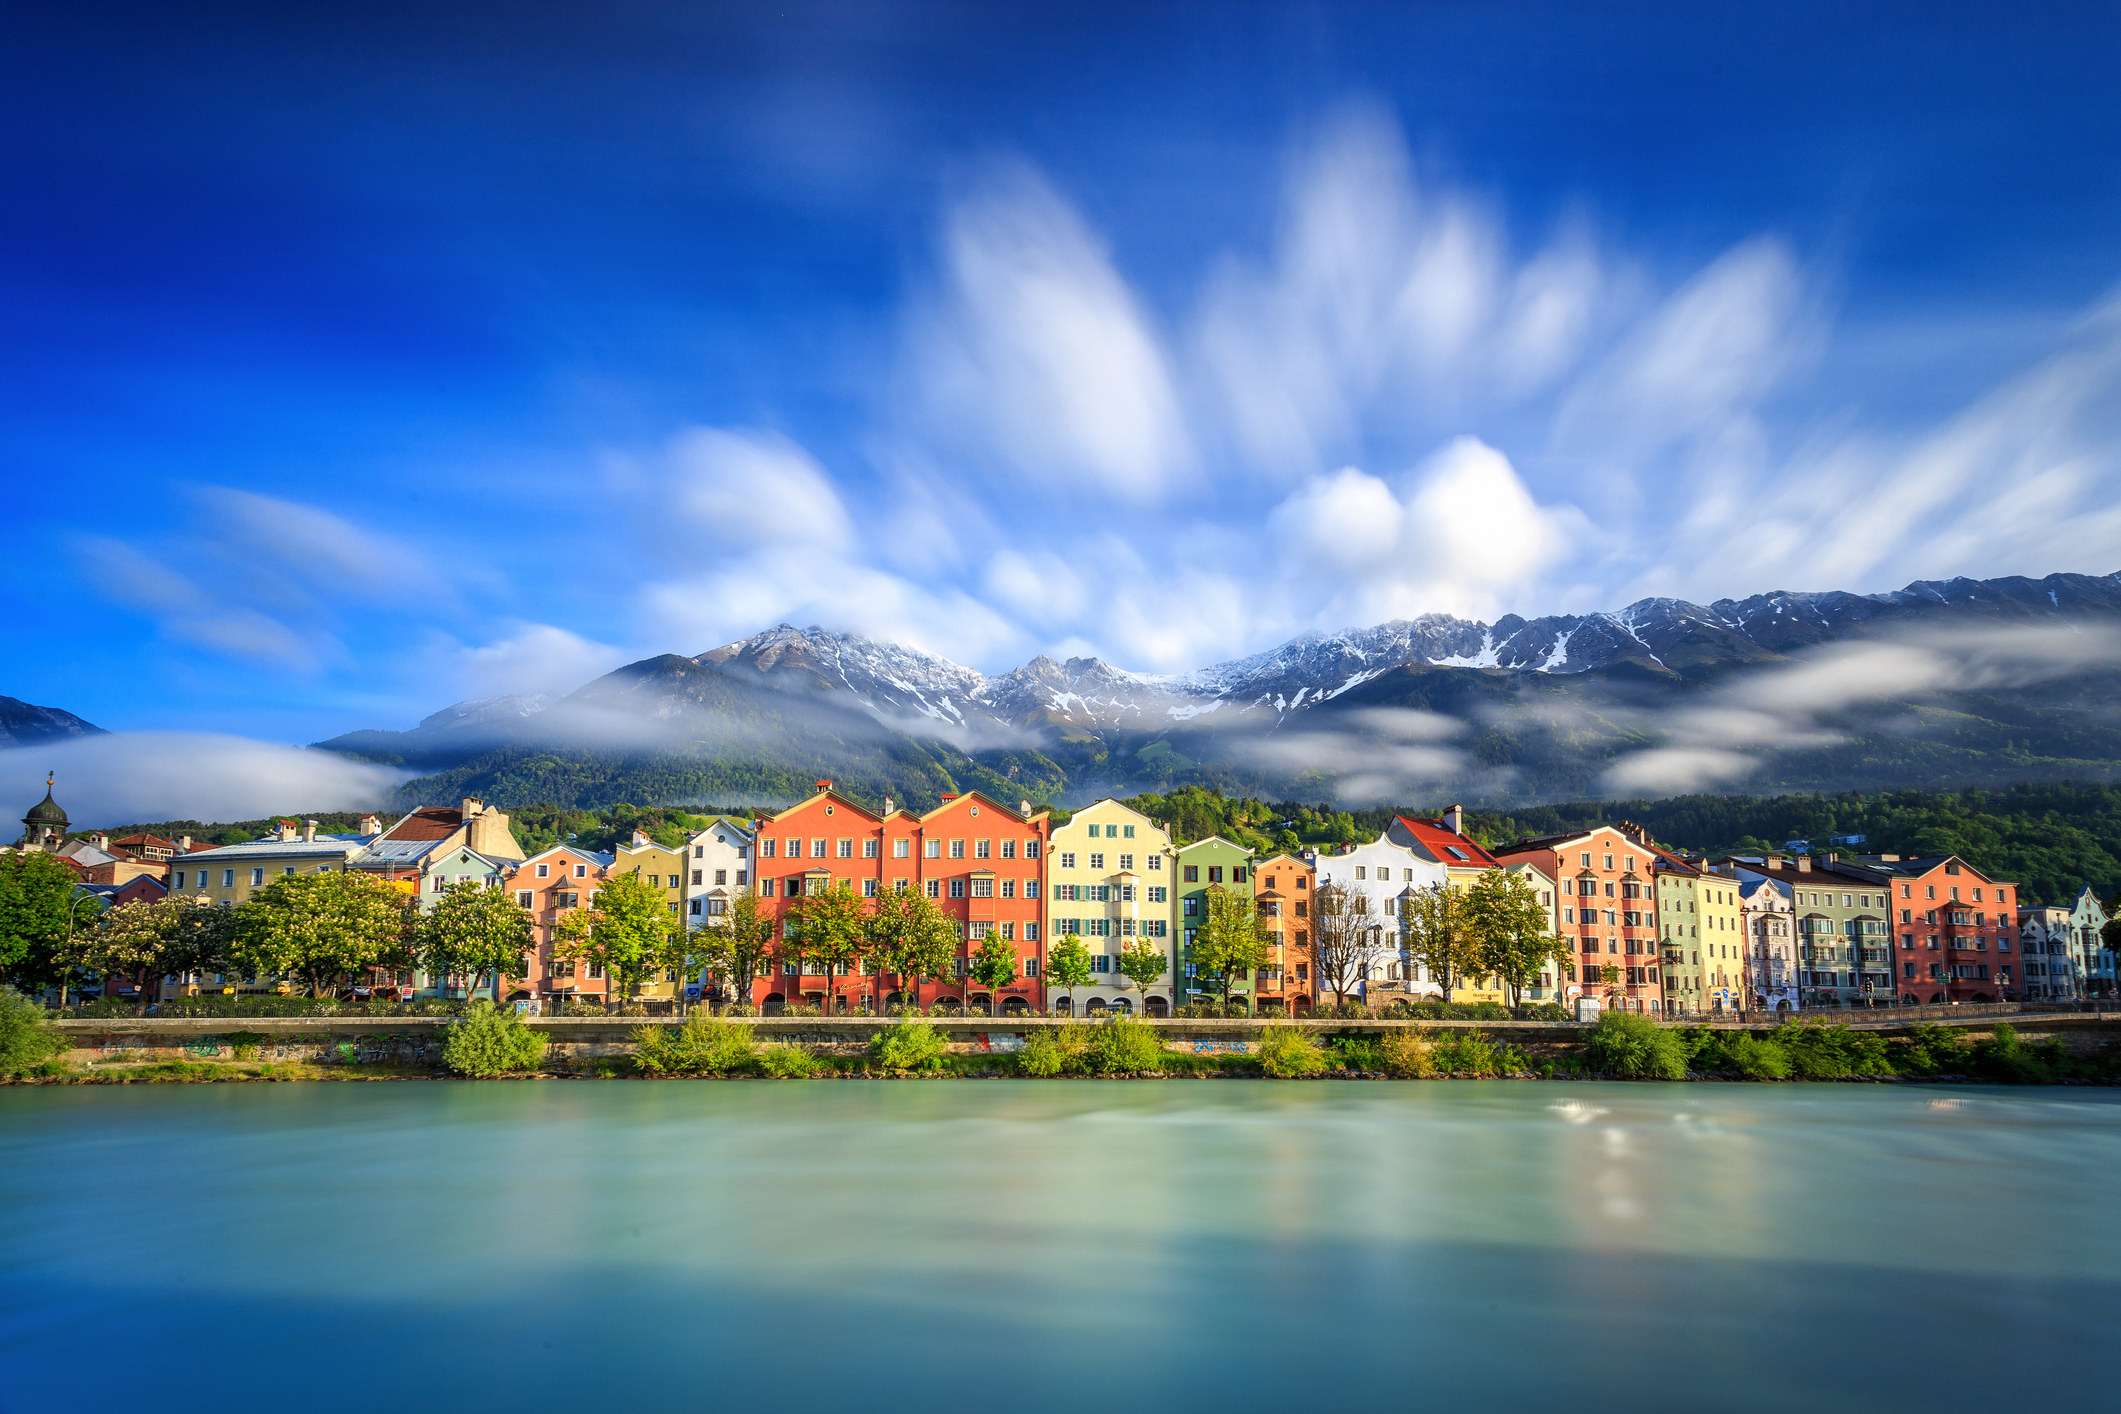 Colorful houses against the mountains in Innsbruck.